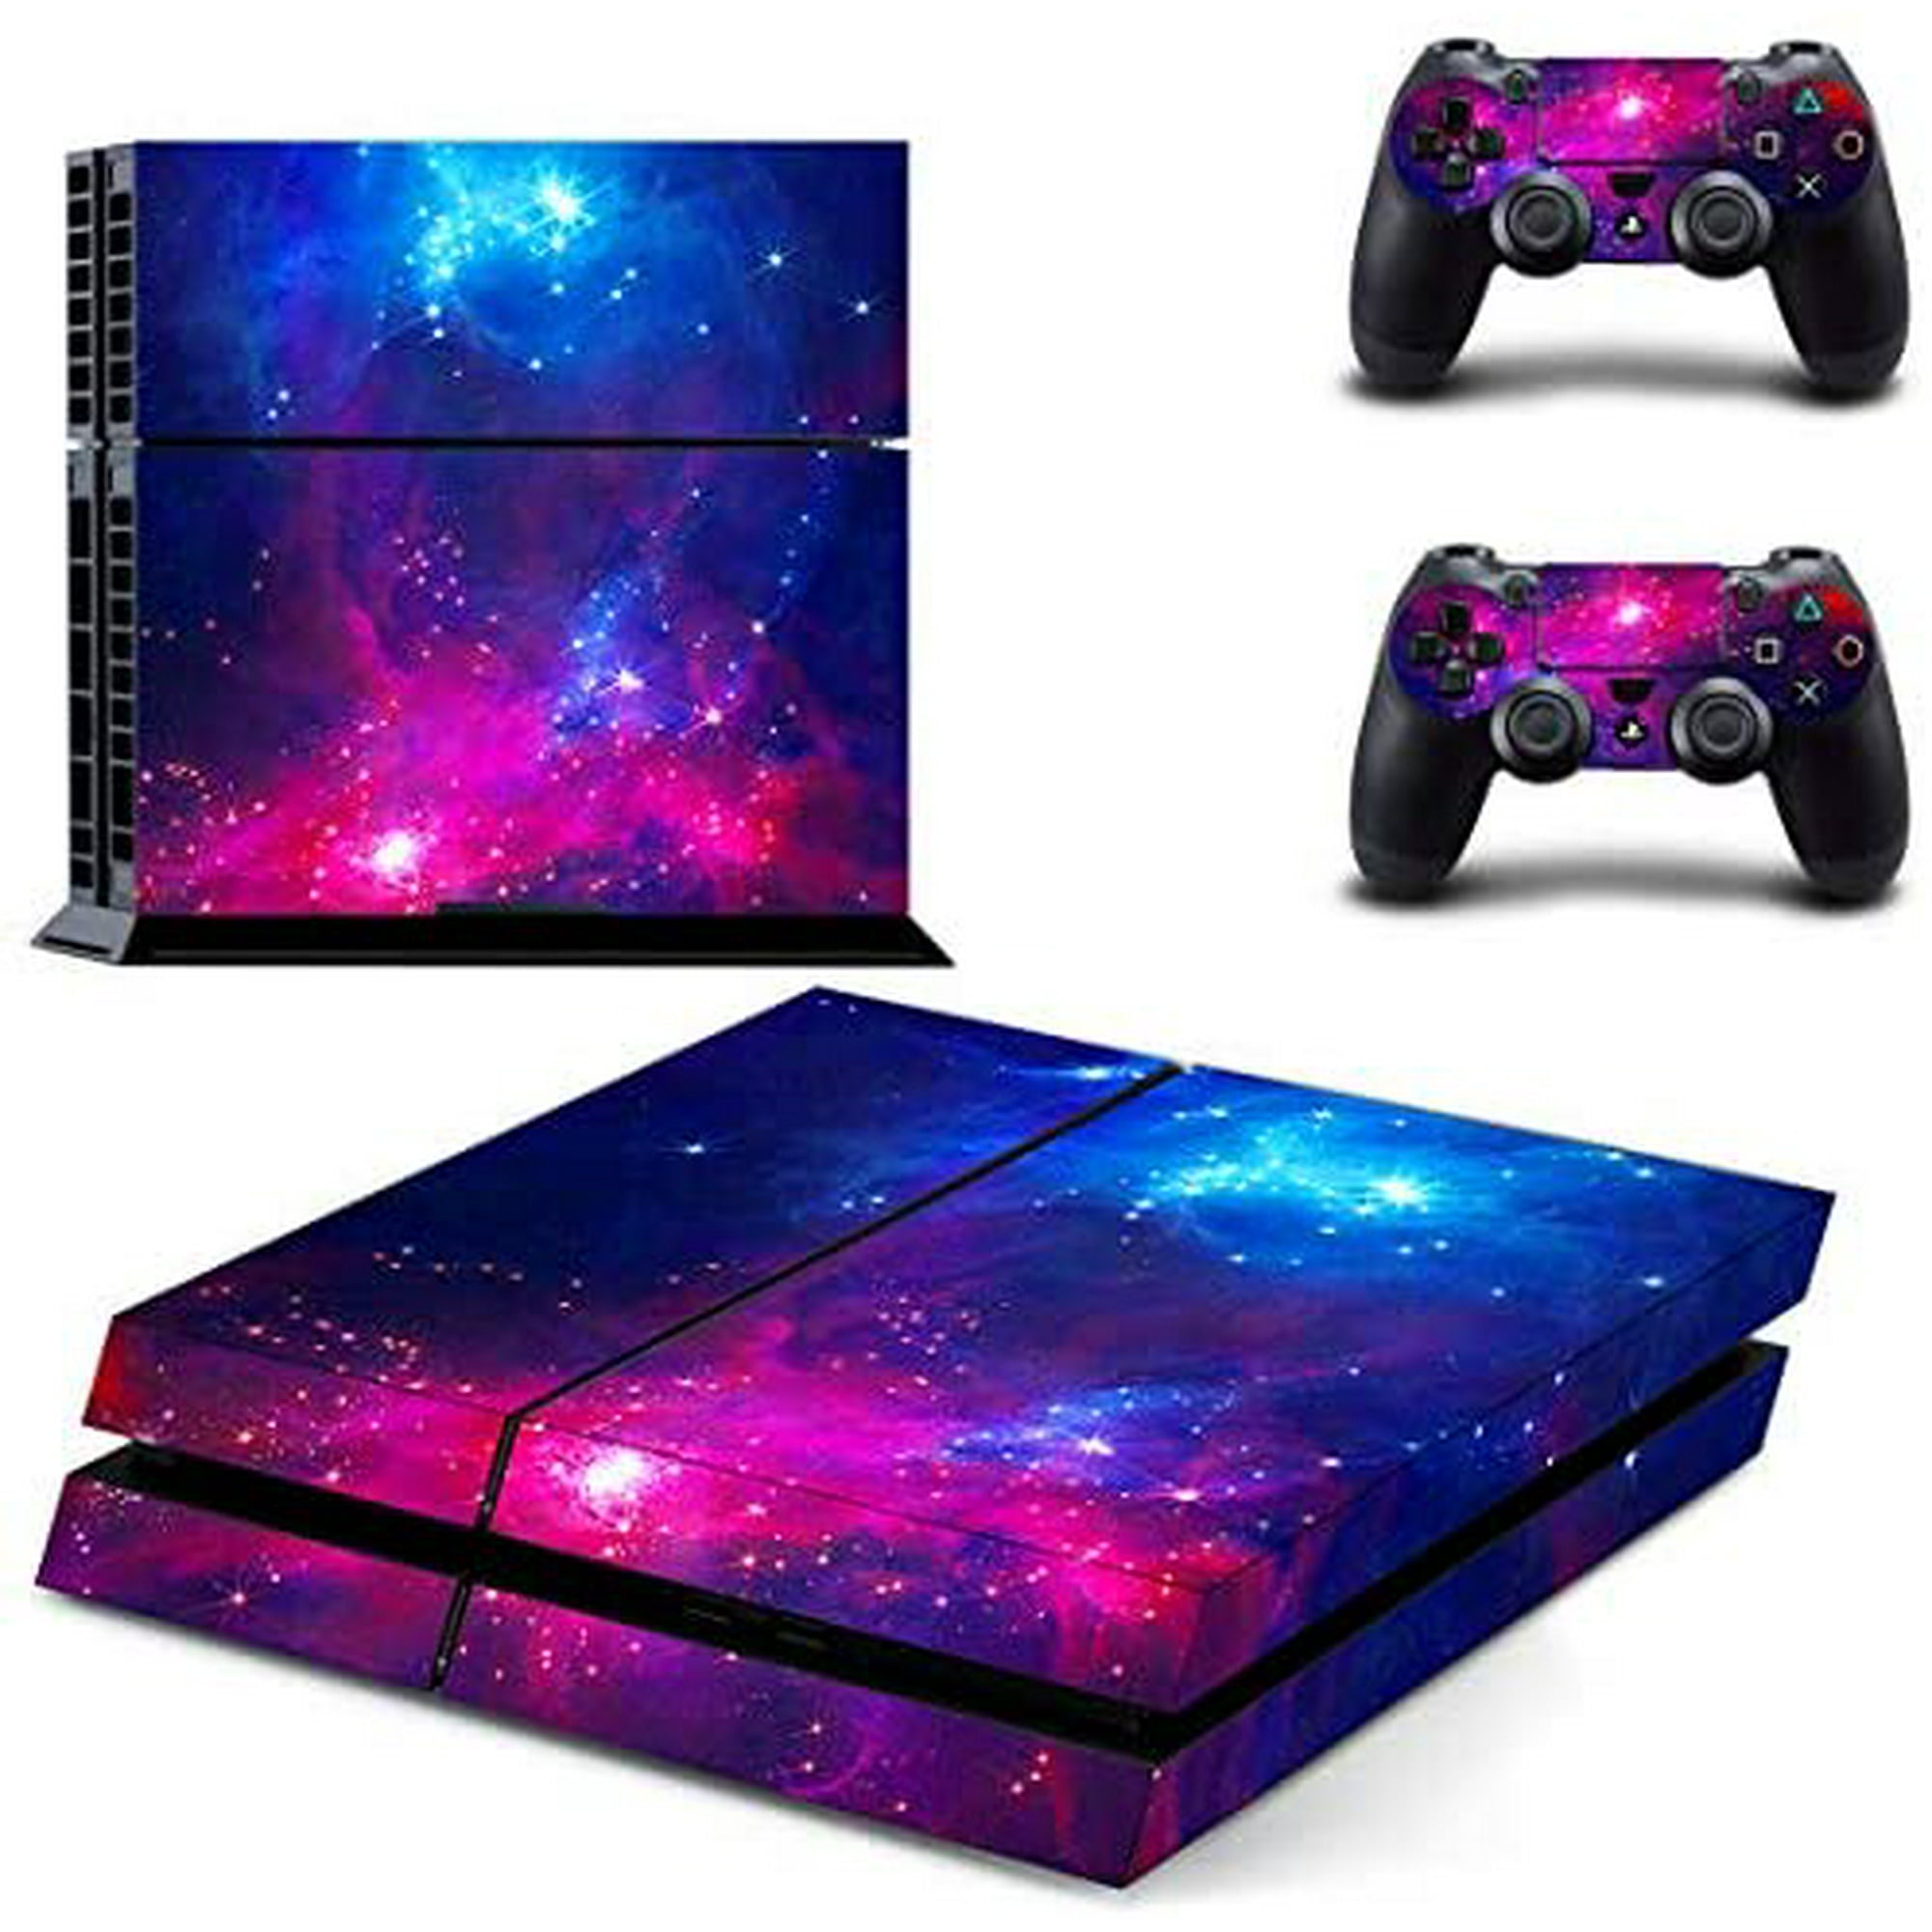 Uushop Purple Blue Galaxy Vinyl Skin Decal Sticker Cover Set For Sony Ps4 Console And 2 Dualshock Controllers Skin Walmart Canada - star platinum decal roblox